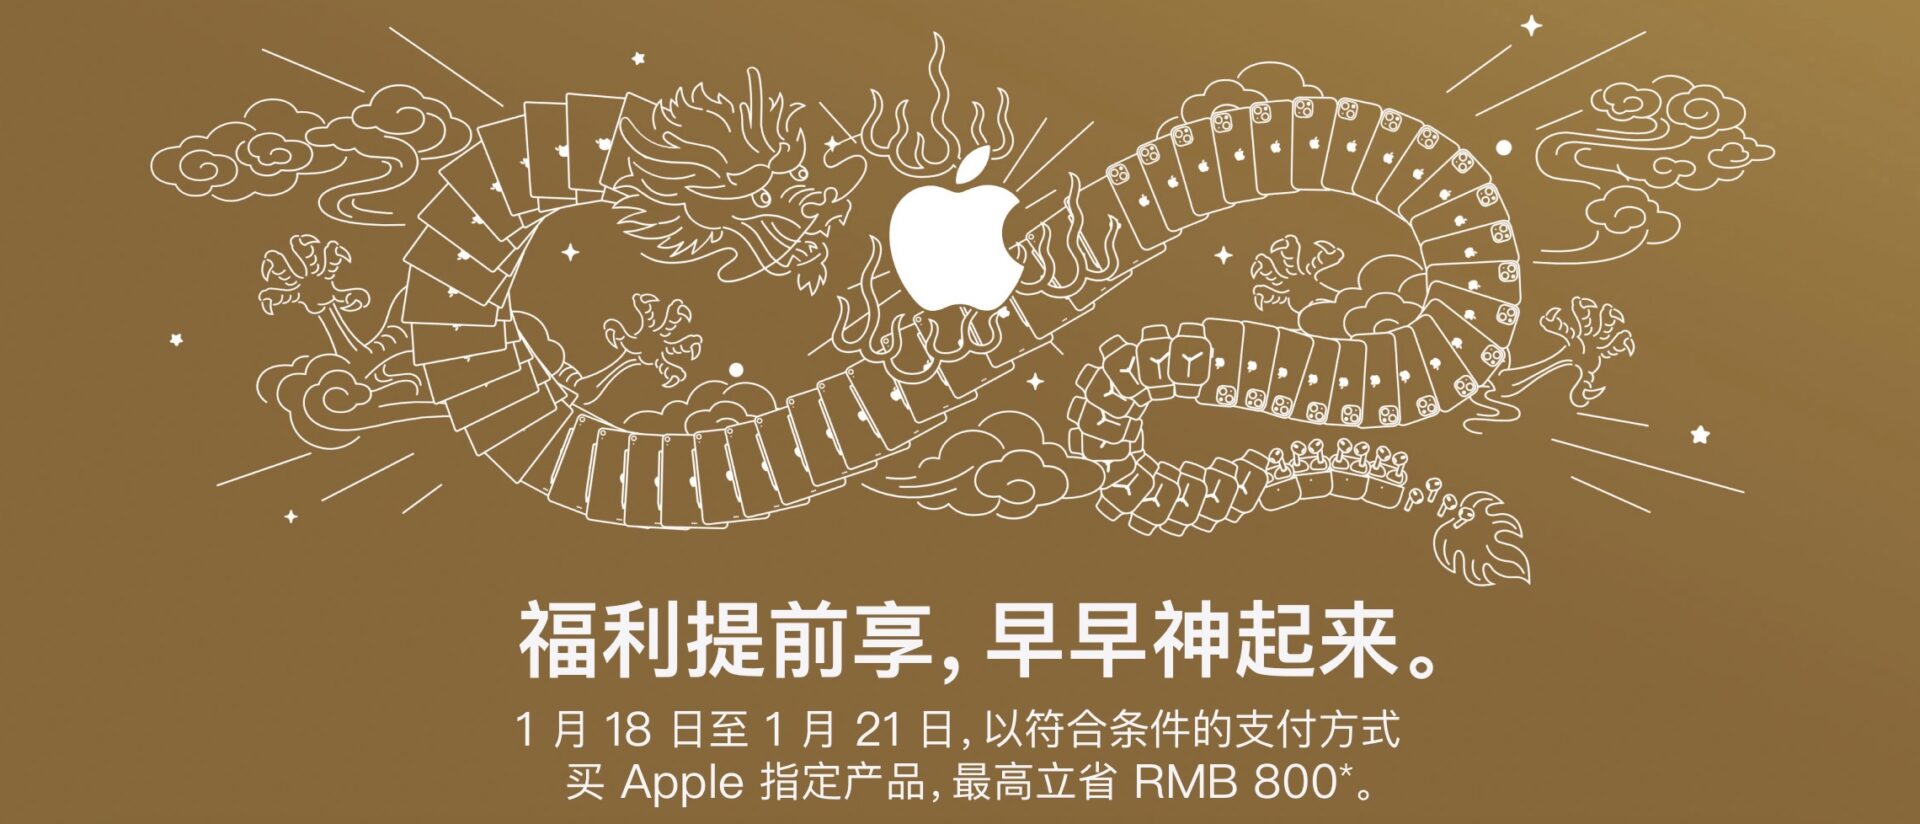 Apple Discounts iPhone 15 in China Amid Demand Worries